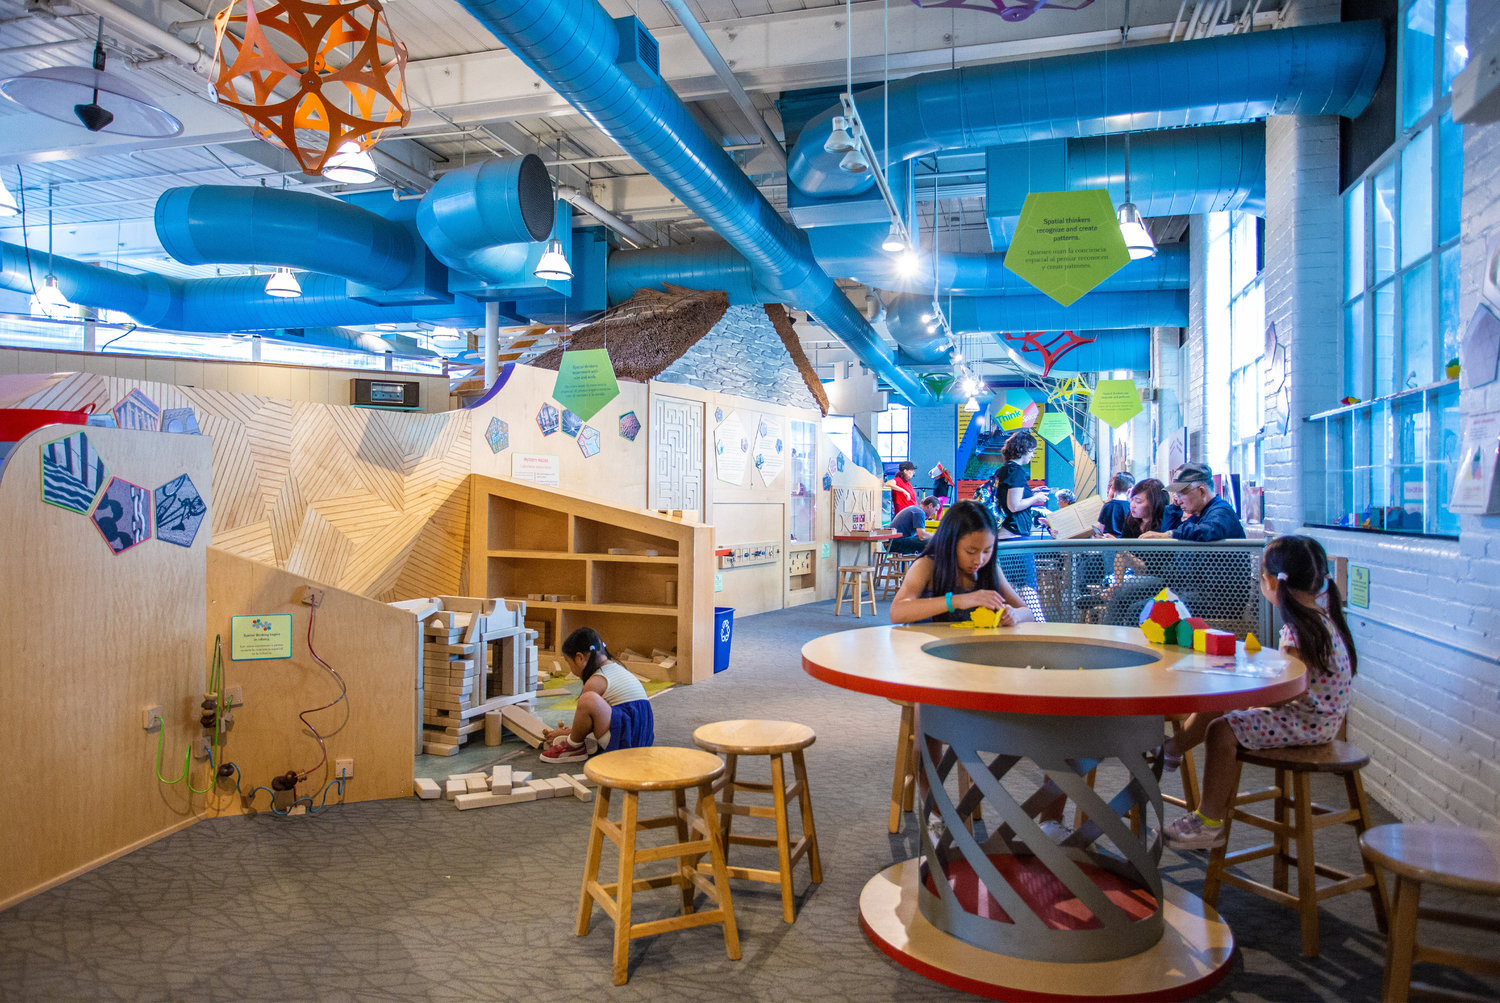 Providence Children’s museum also offers all kinds of online activities, programs + webinars